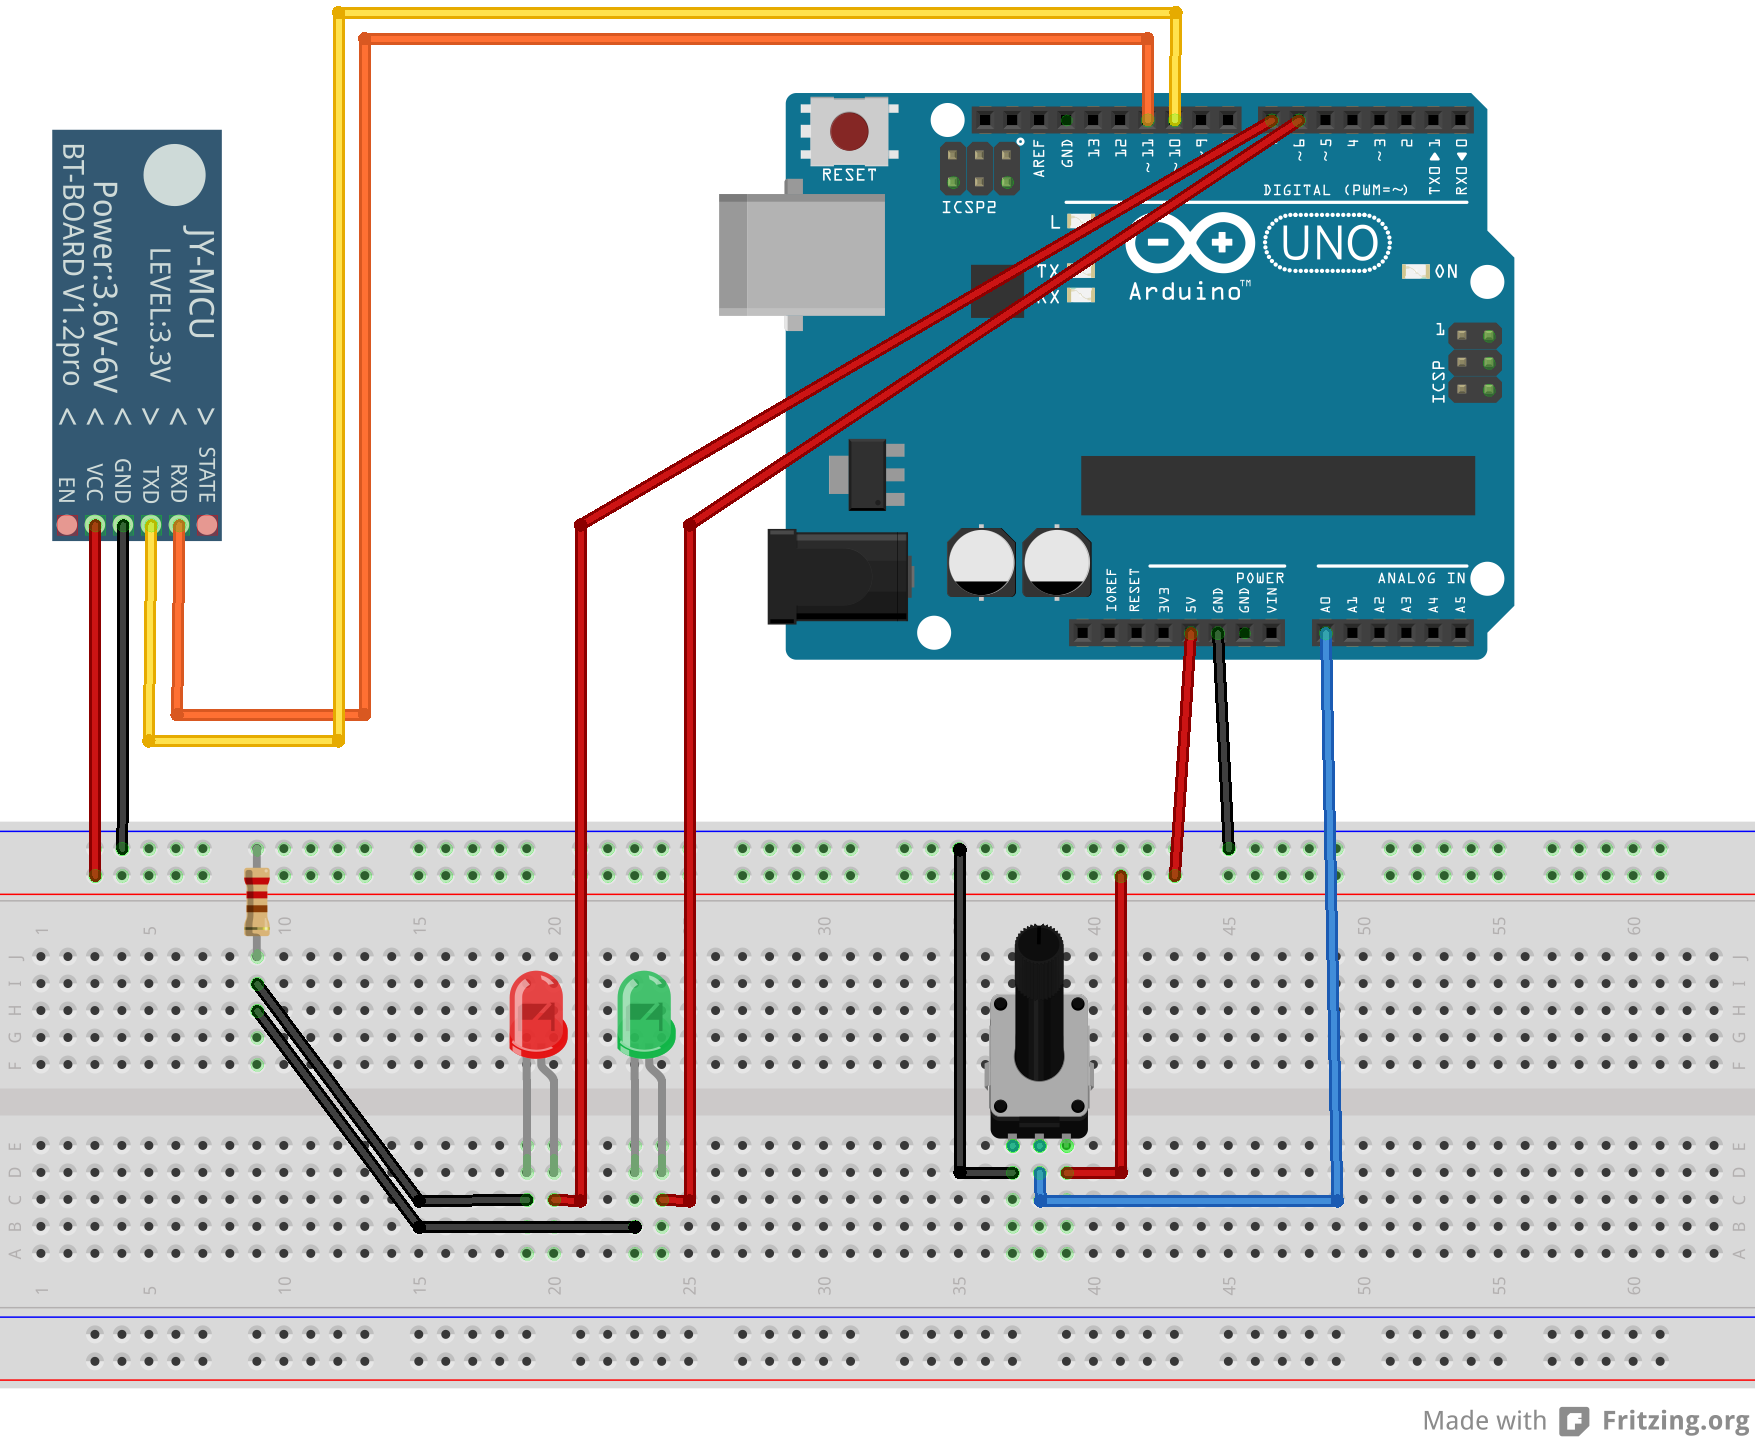 Arduino UNO R3 with 2 LEDs, a potentiometer and a Bluetooth module